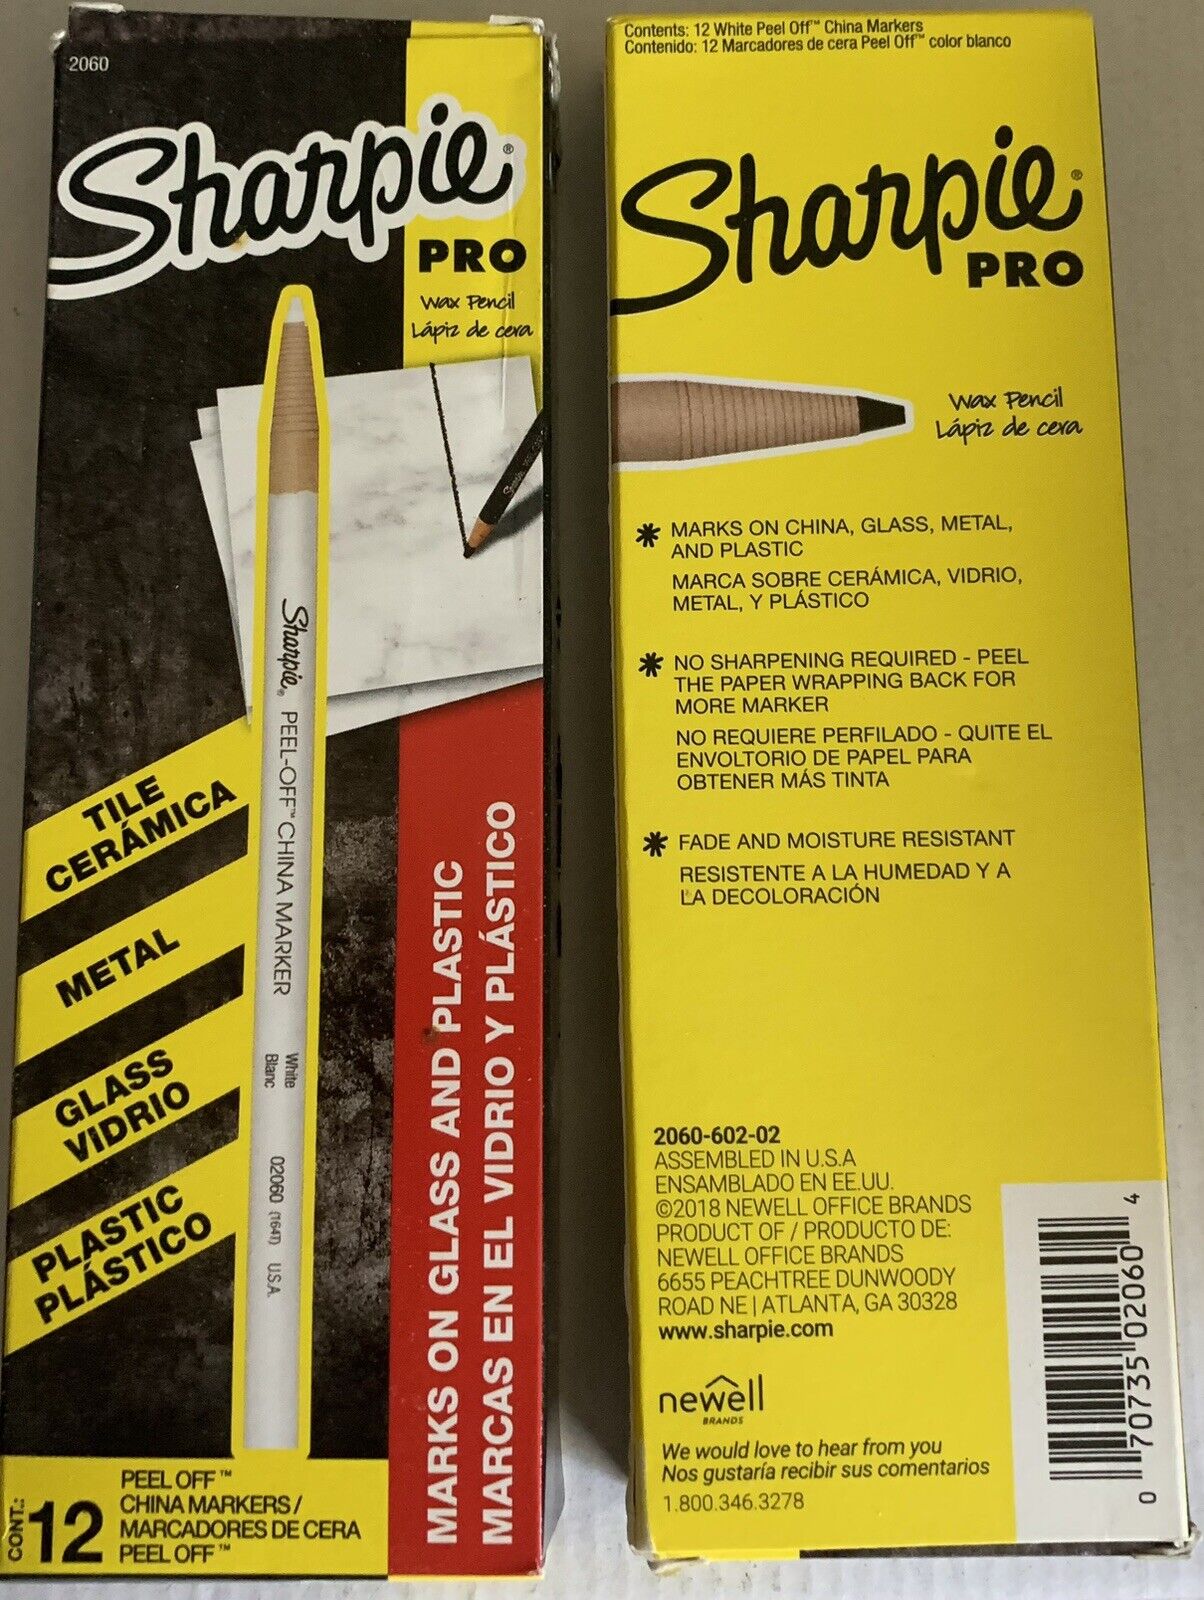 2 pack Sharpie Pro White Peel Off China Marker, Grease Pencil, 02060, 12 per box